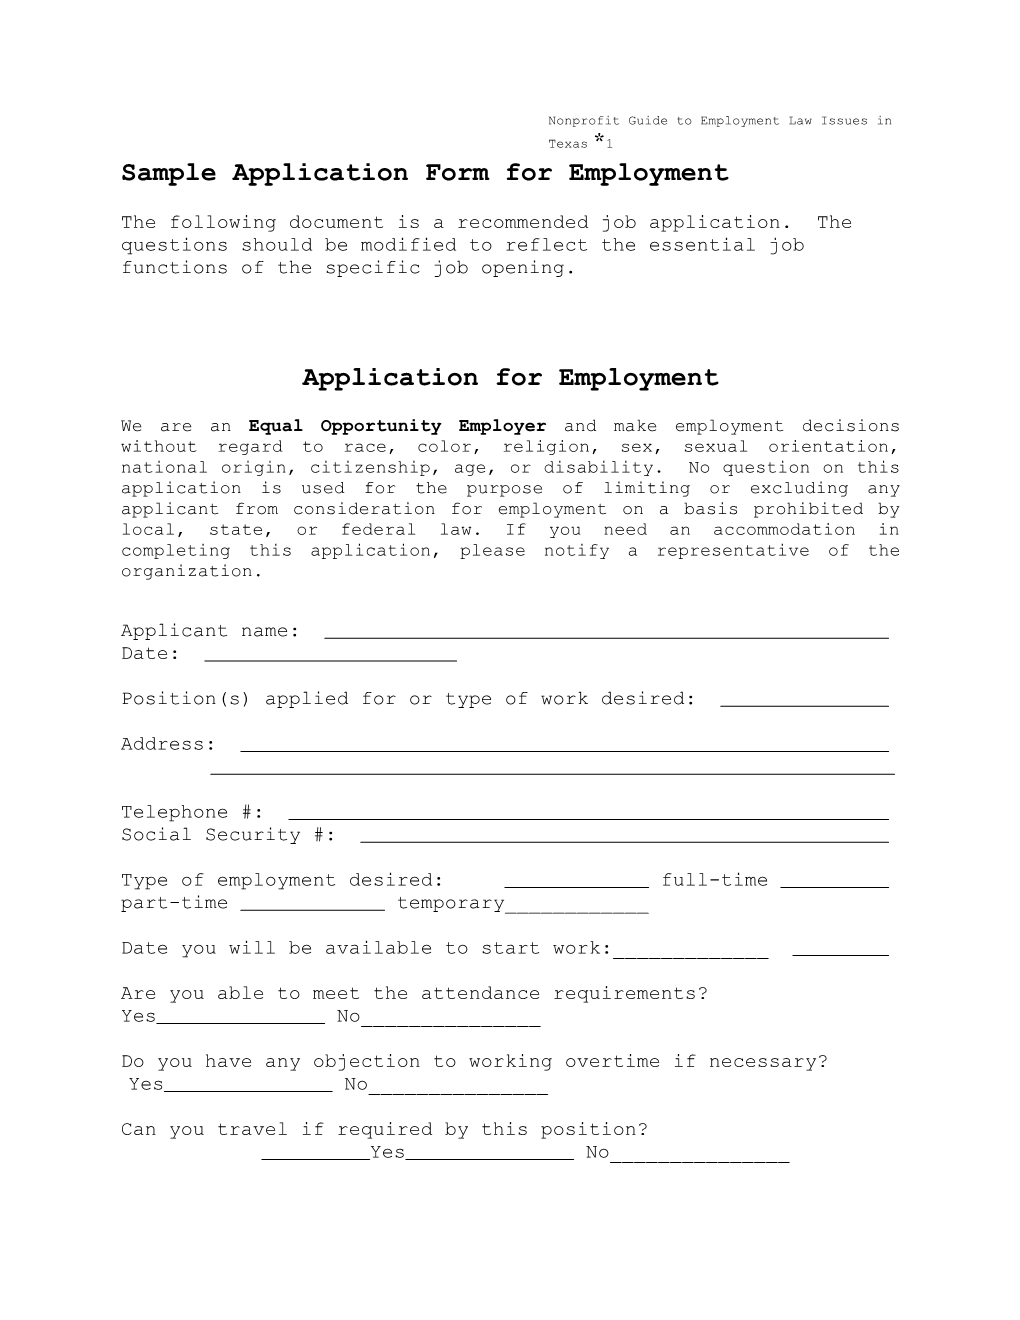 Sample Application Form for Employment